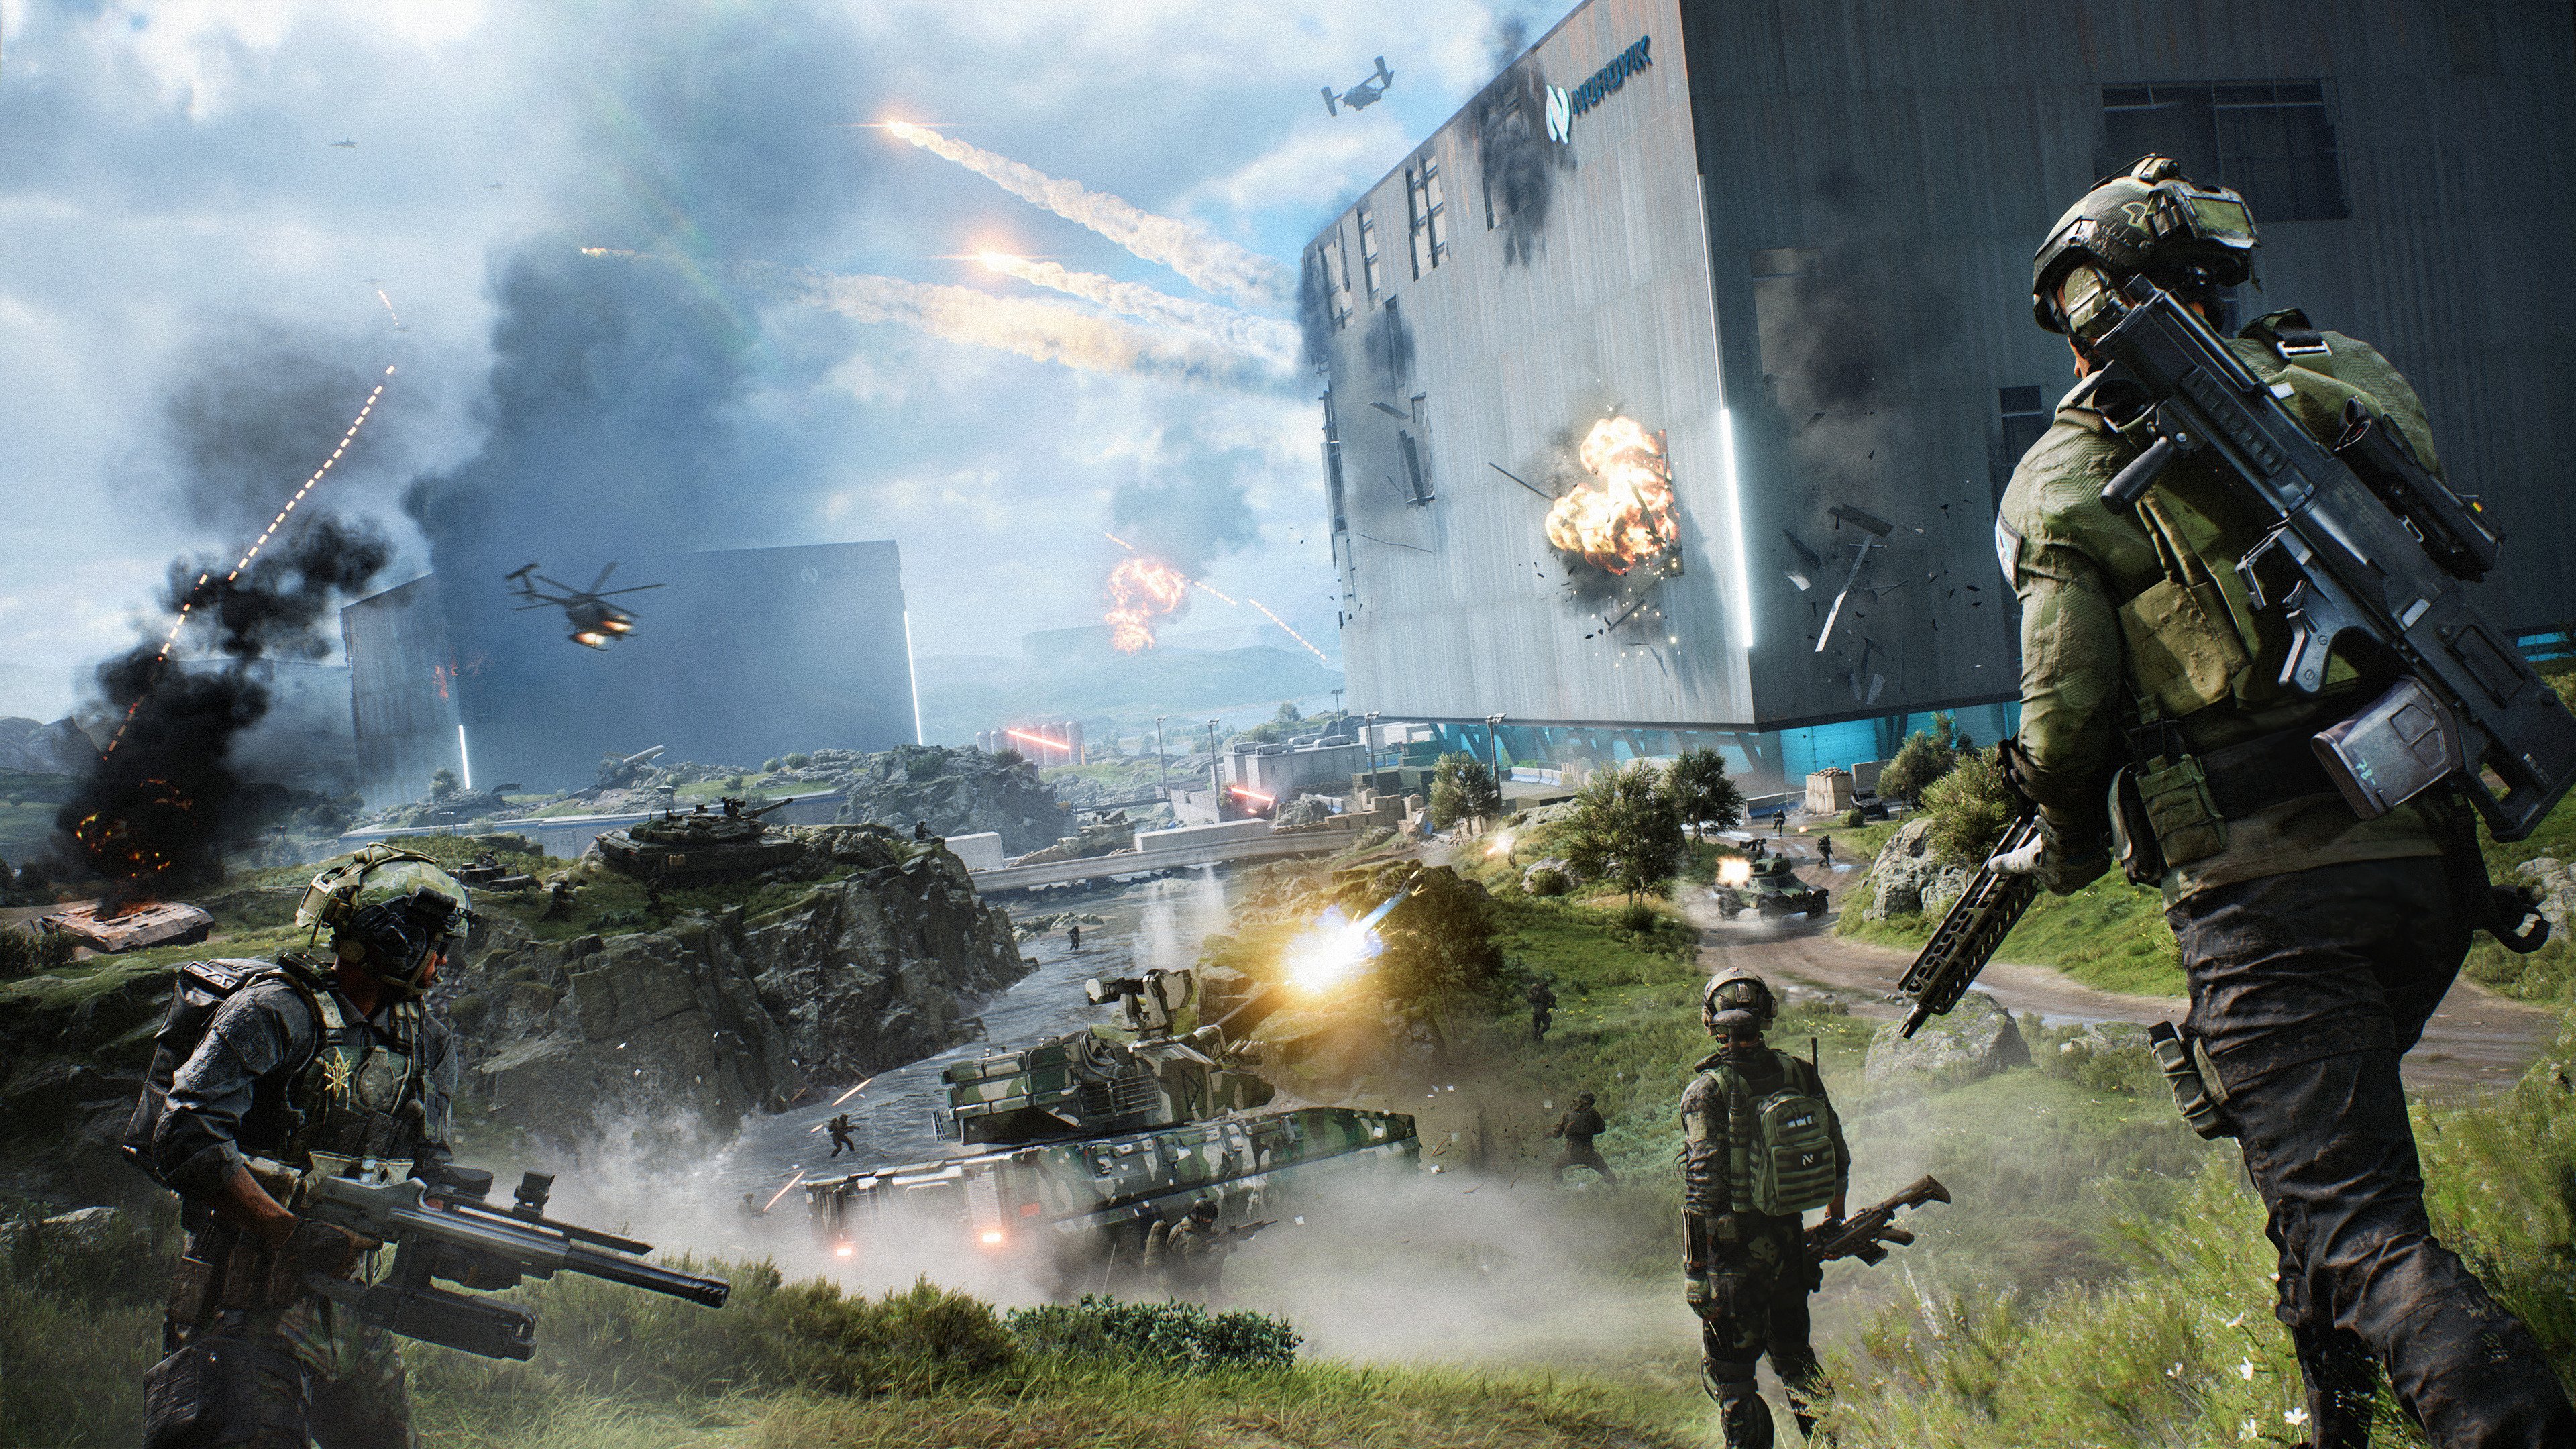 How to watch Battlefield 2042 gameplay reveal live stream